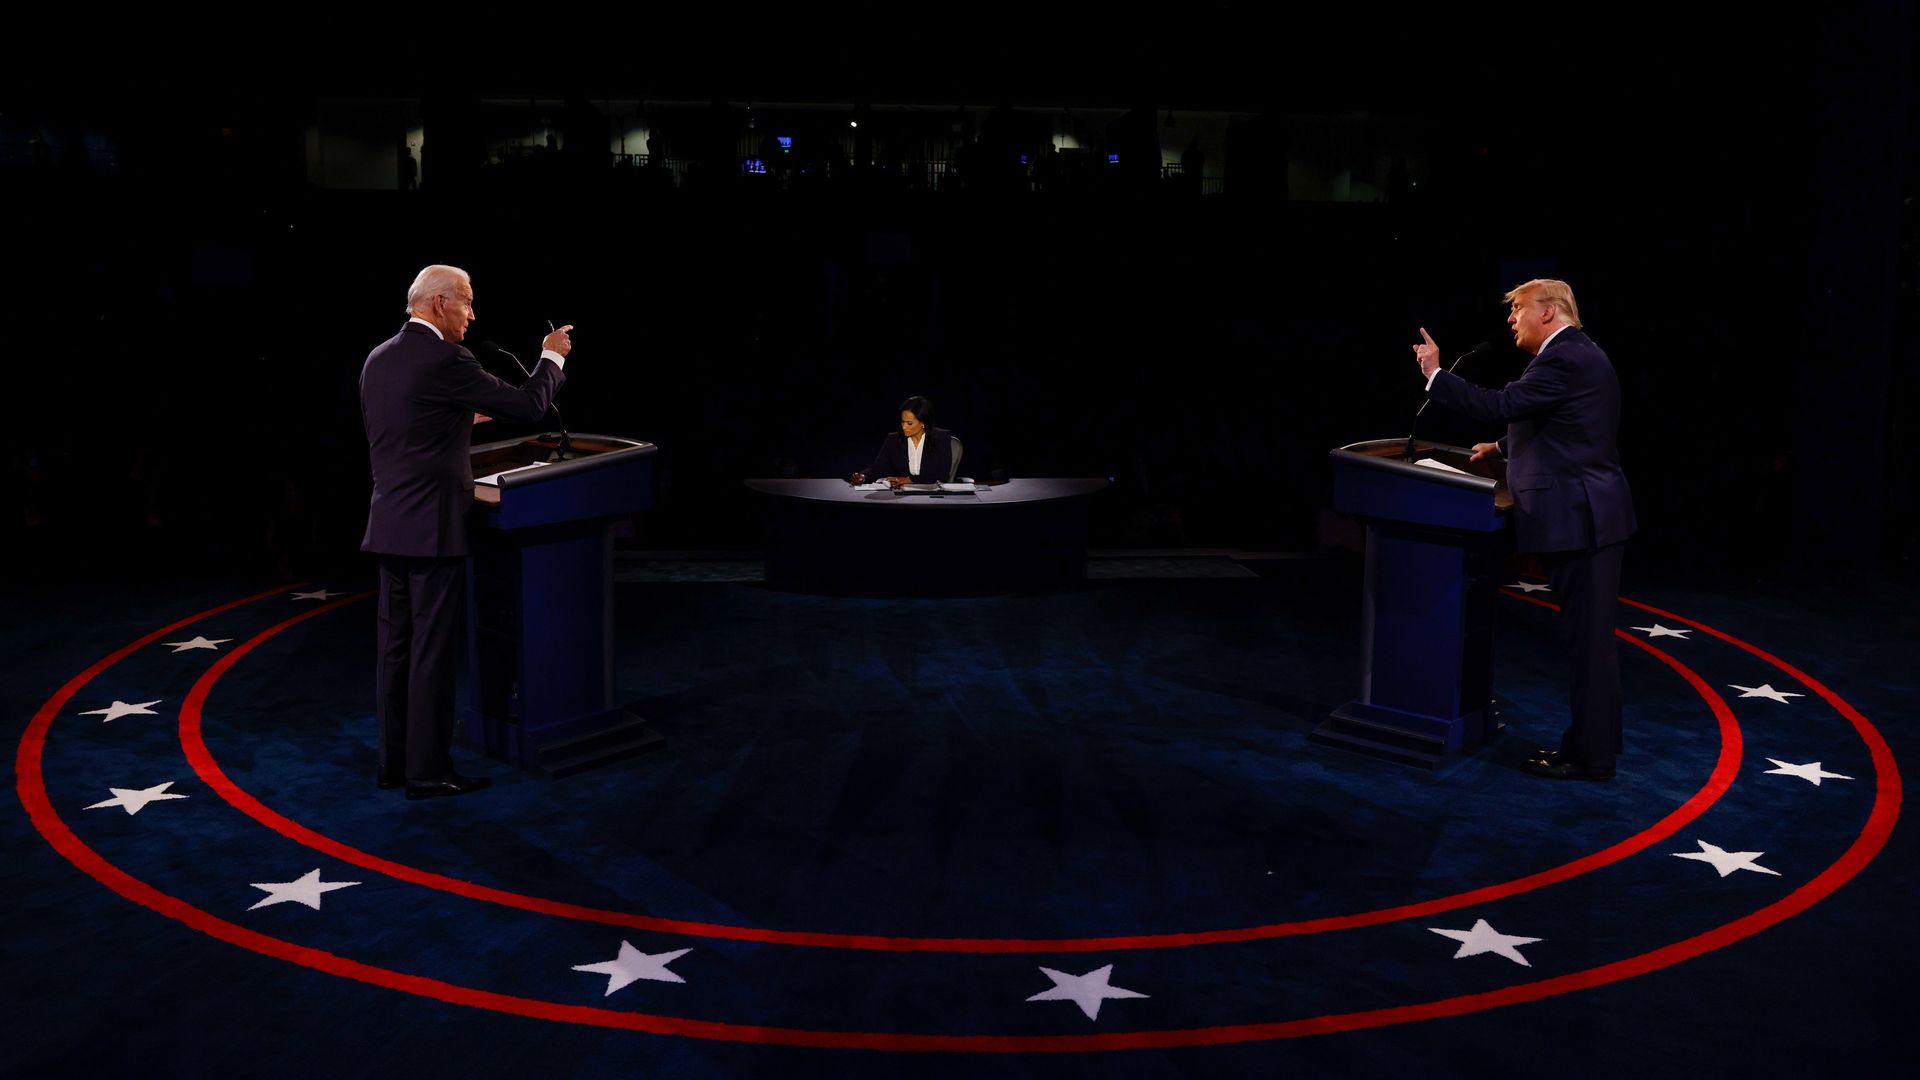 Biden, left, and Trump, right, on a debate stage in 2020. They stand in a circle that has stars on it and both are pointing. The photo is taken from behind. 